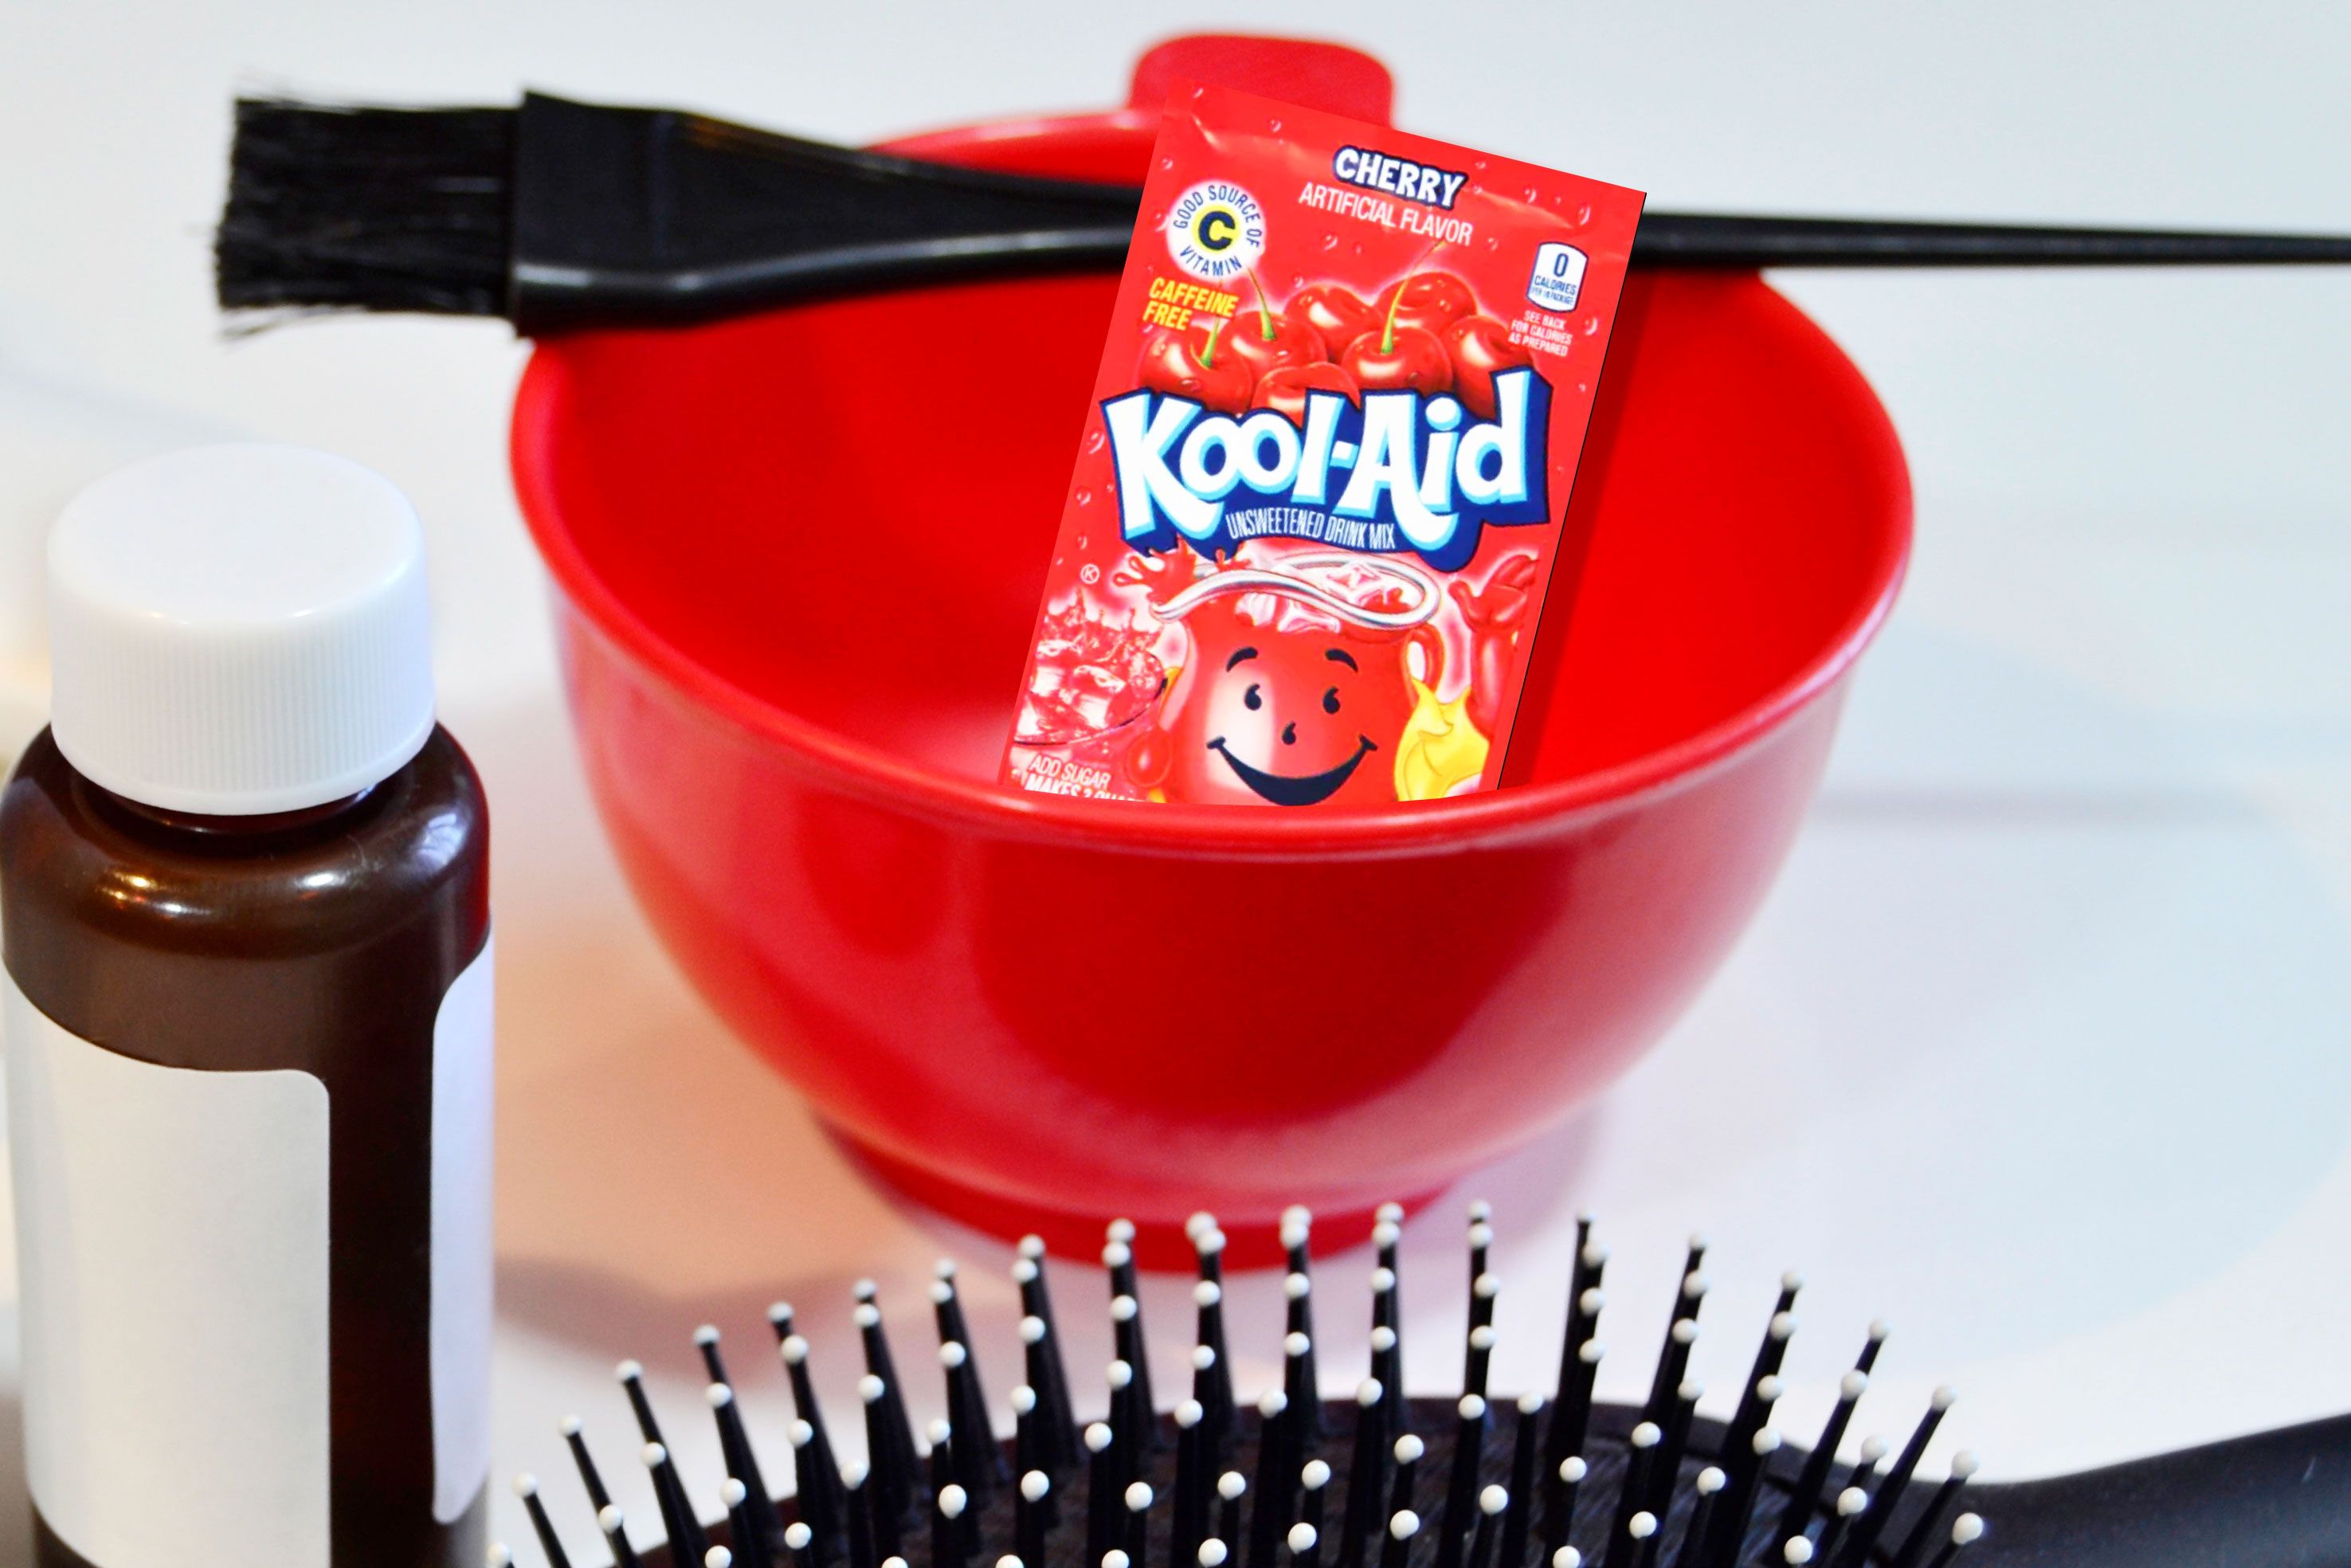 Blue Kool Aid Hair Toner: 10 Best Results
1. How to Use Blue Kool Aid as a Hair Toner - wide 3